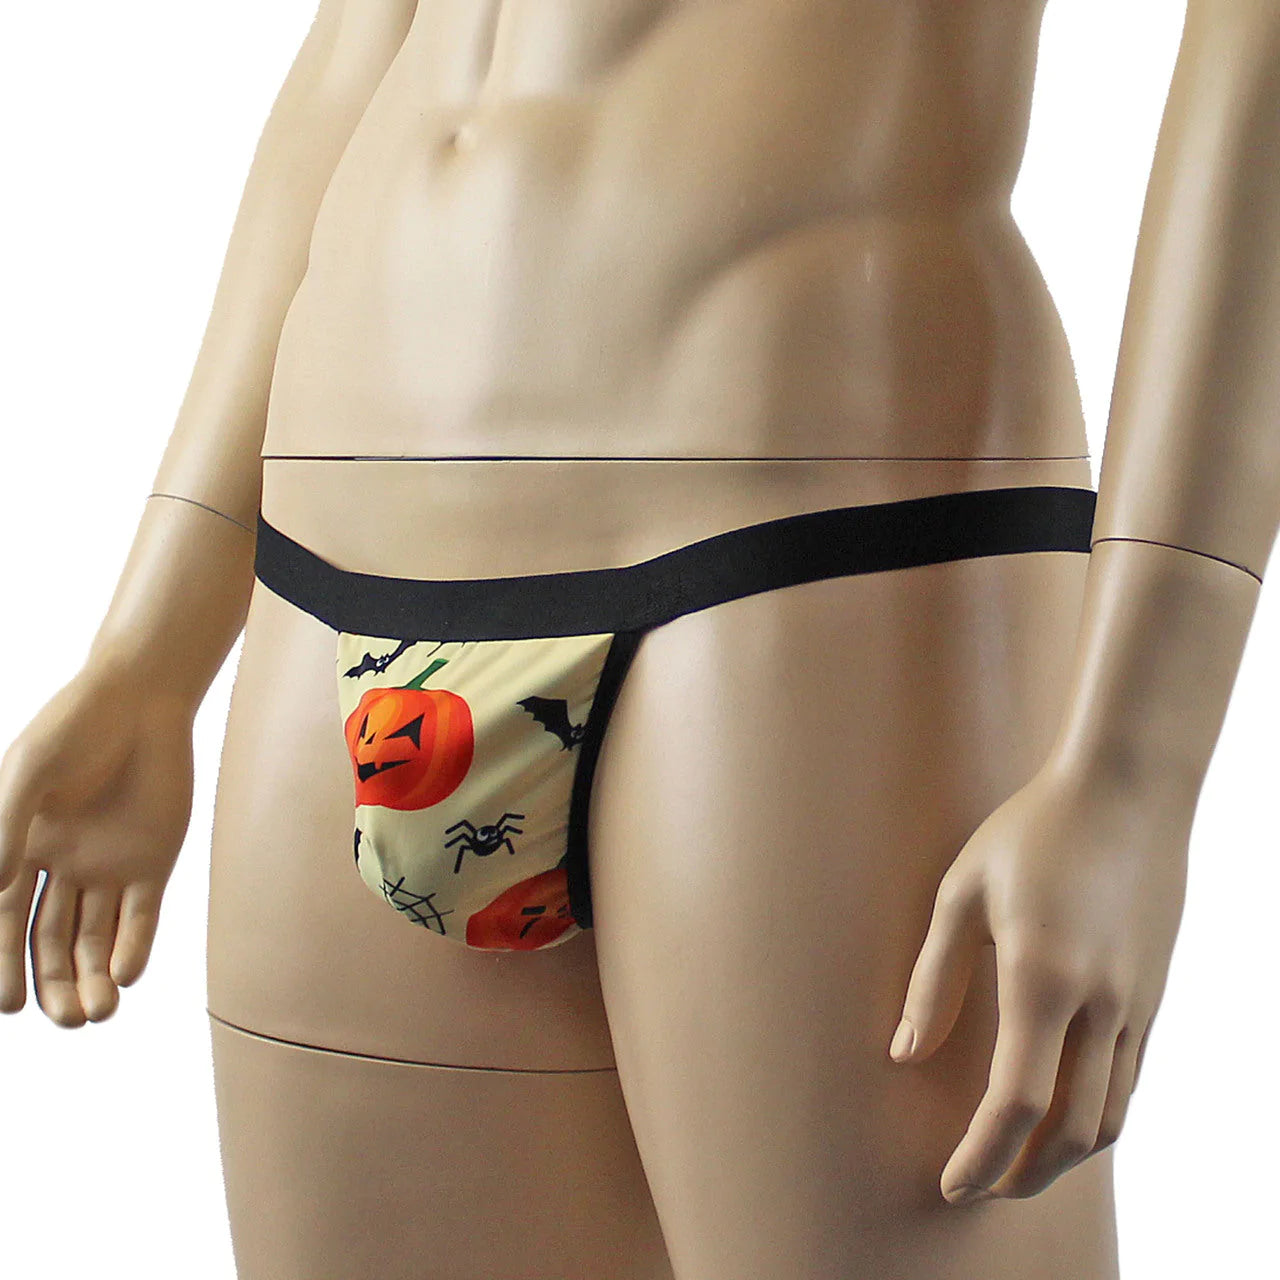 SALE - Mens Halloween Pumpkin Faces, Spiders and Bats G string Thong with Elastic Band